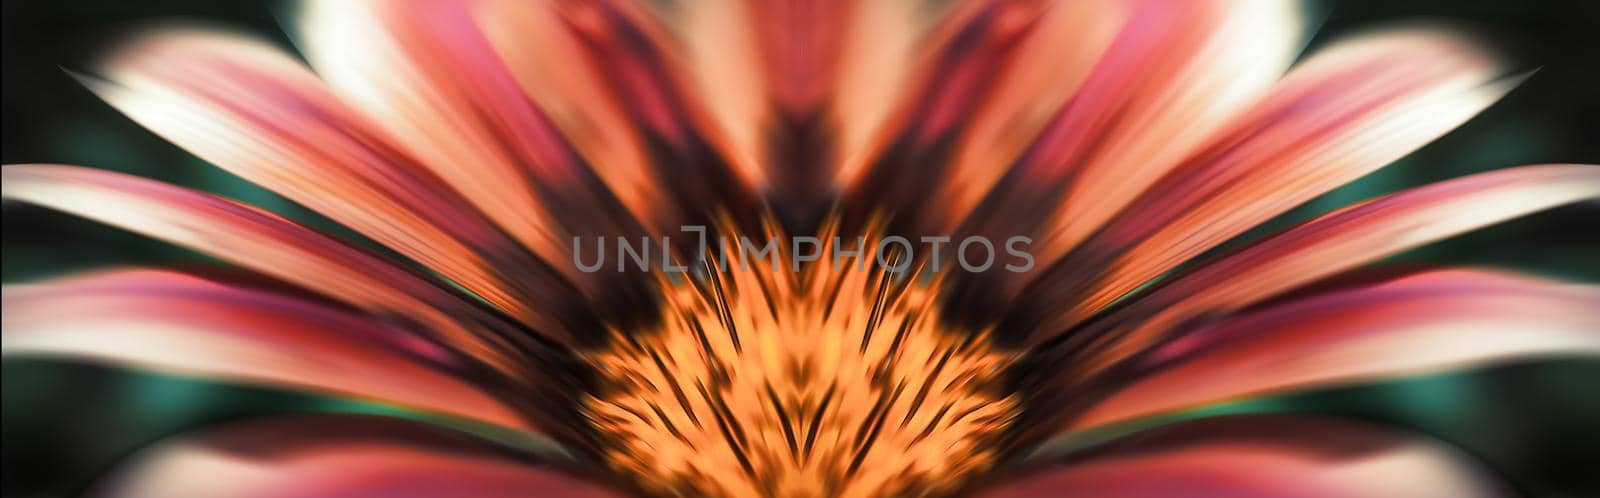 Floral background. Abstract blurred image of gerbera flowers